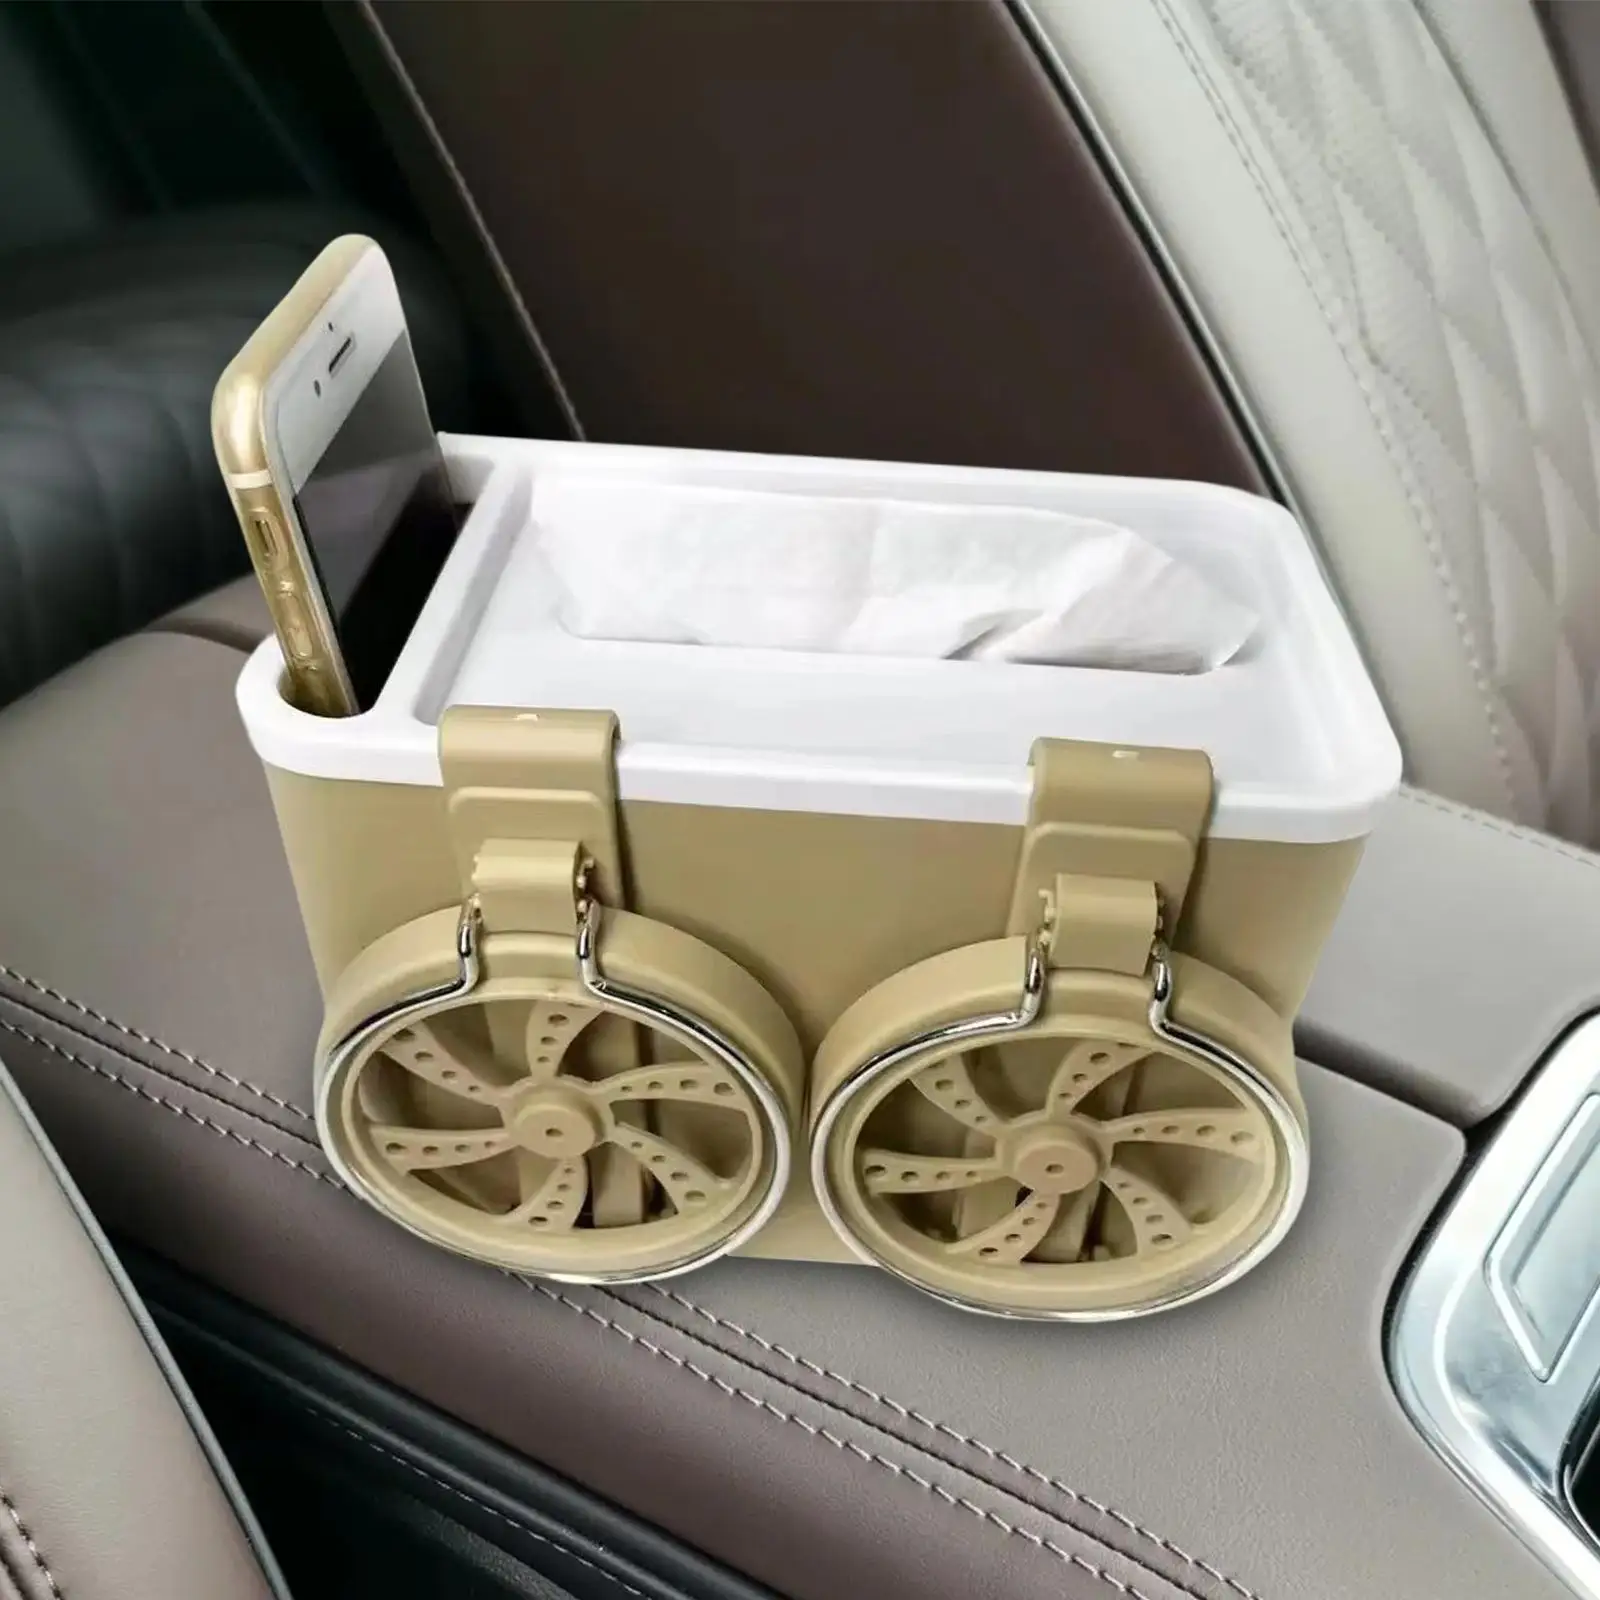 Car Armrest Storage Box with Cup Holder Foldable Universal drink